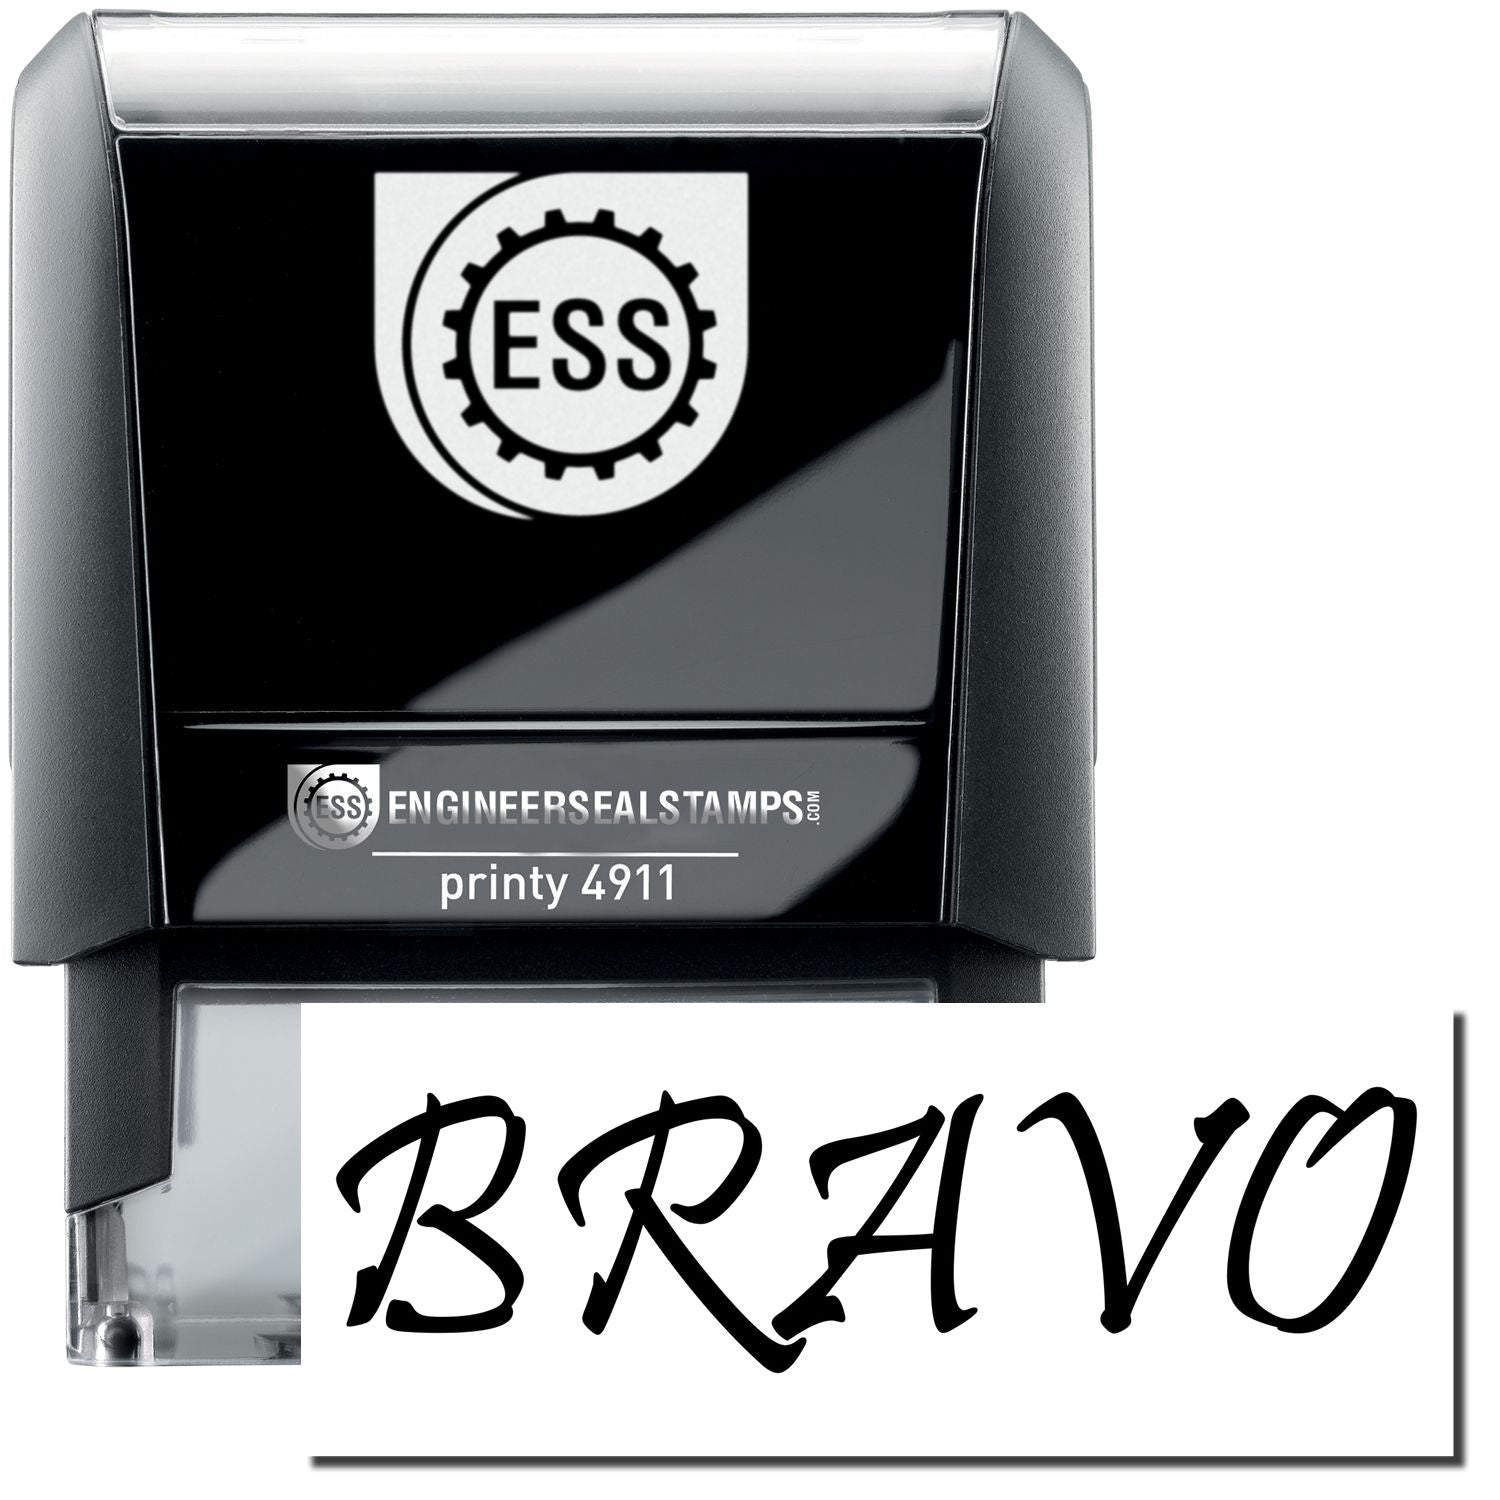 A self-inking stamp with a stamped image showing how the text "BRAVO"  is displayed after stamping.